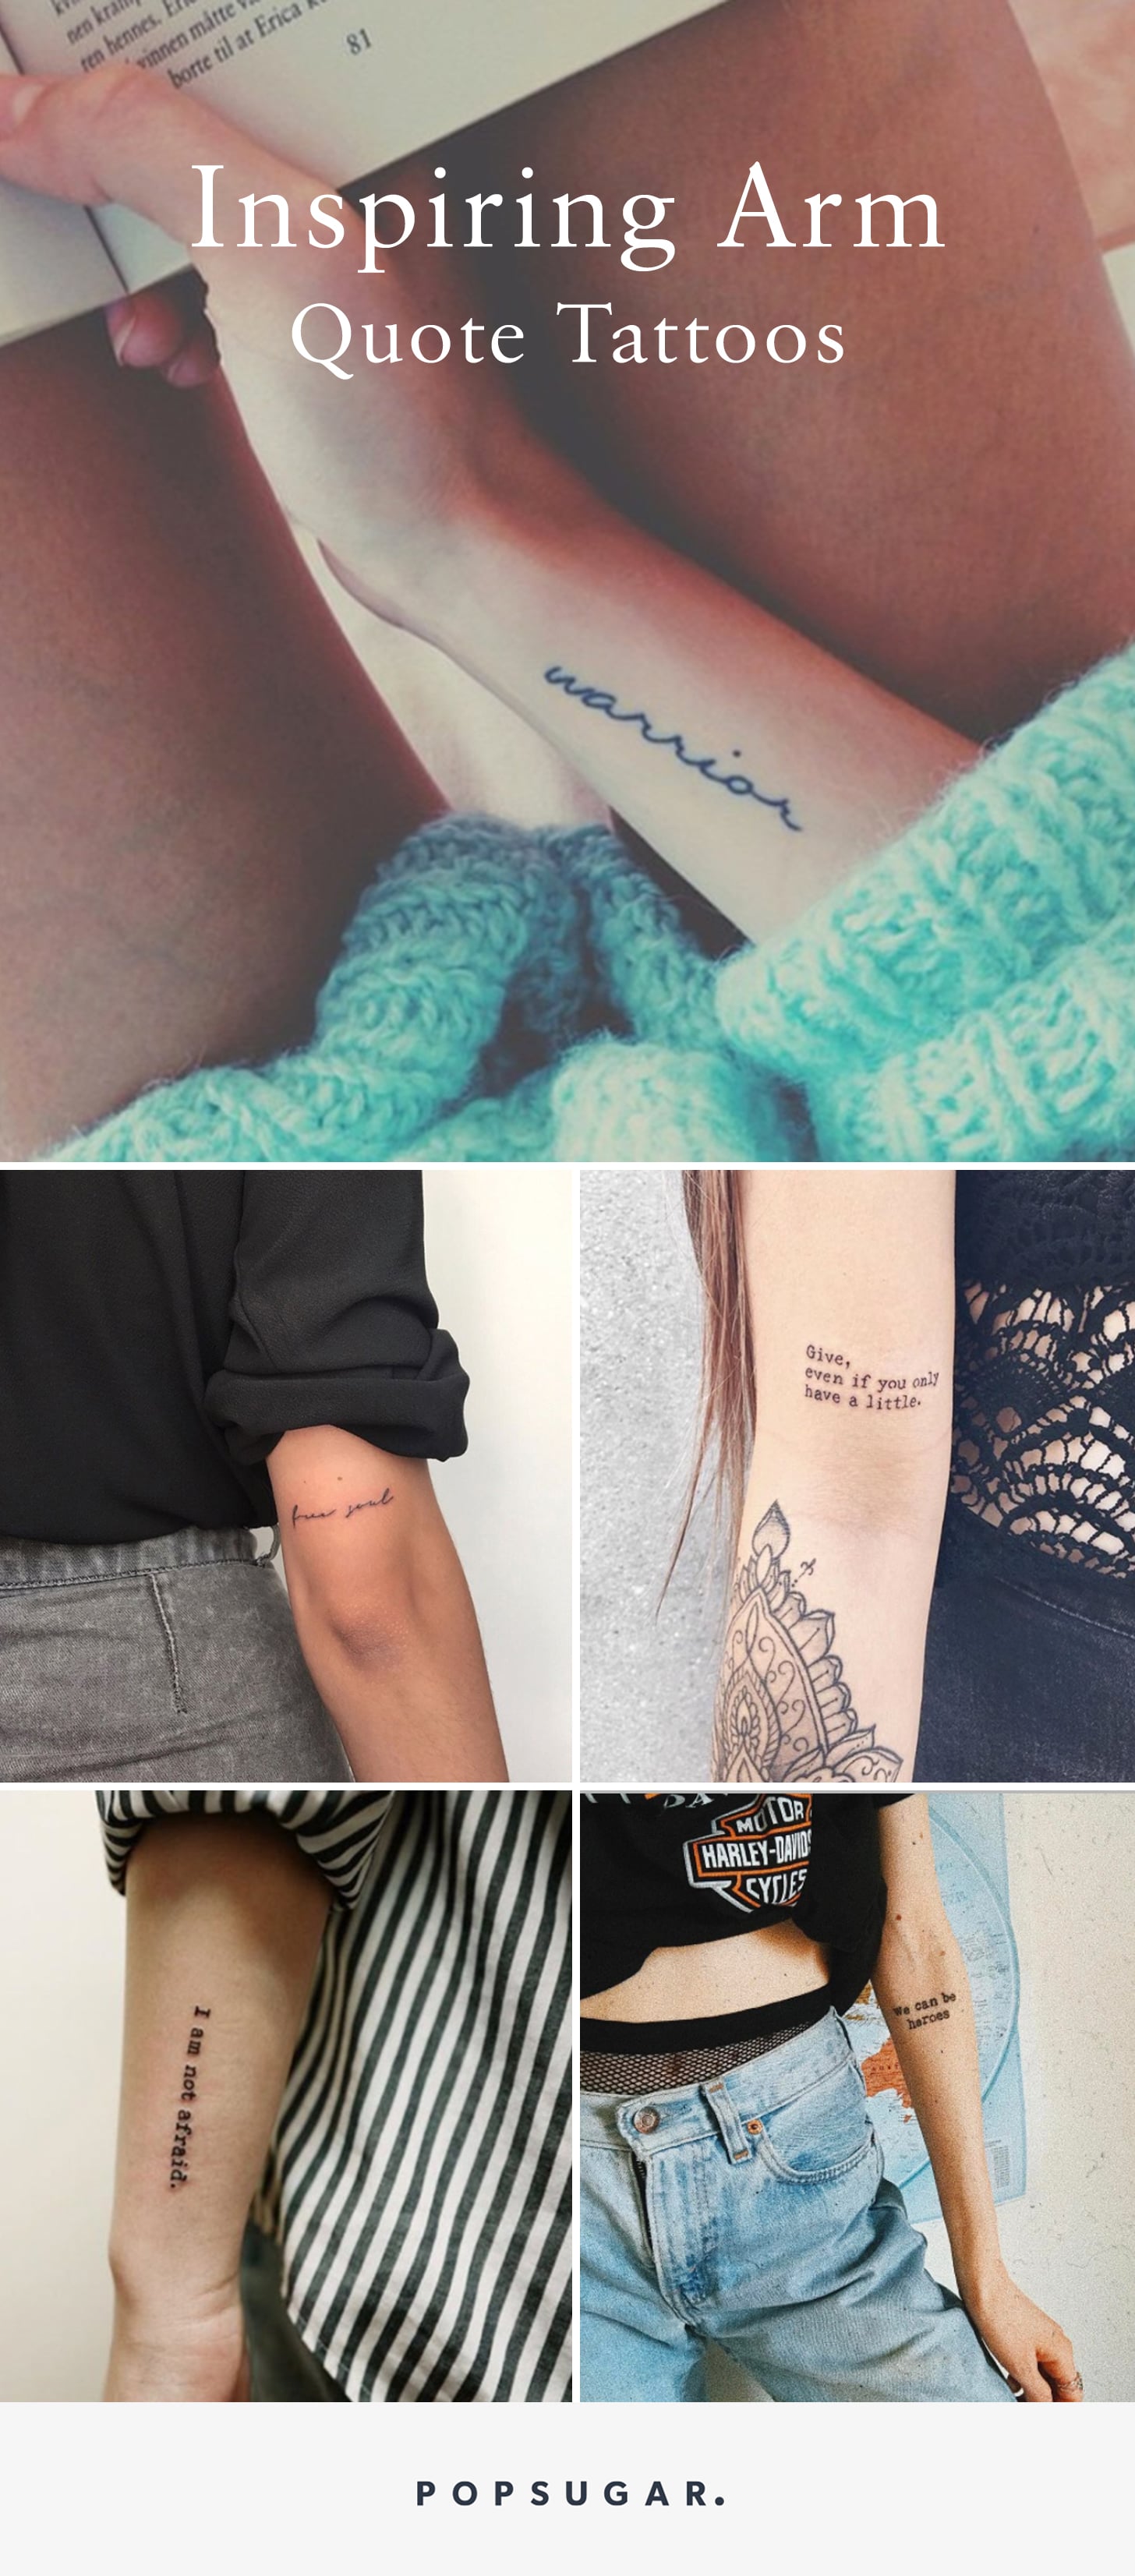 Details more than 167 forearm quote tattoos super hot